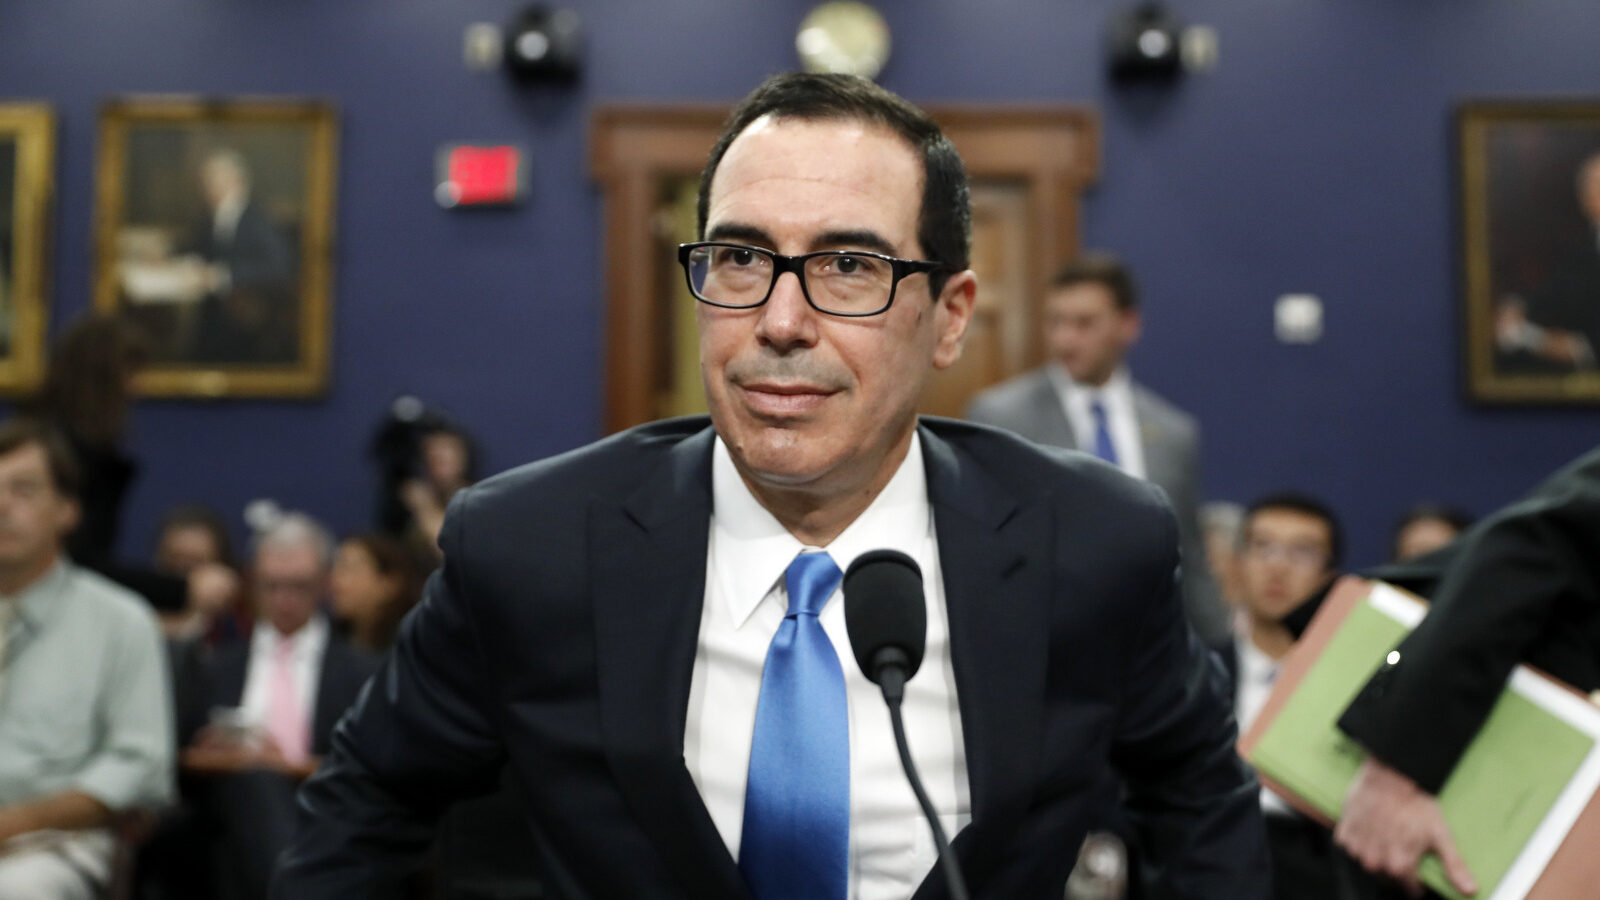 Treasury Secretary Steven Mnuchin takes his seat to testify at a House Appropriations subcommittee hearing on the budget, on Capitol Hill, June 12, 2017, in Washington. (AP/Alex Brandon)